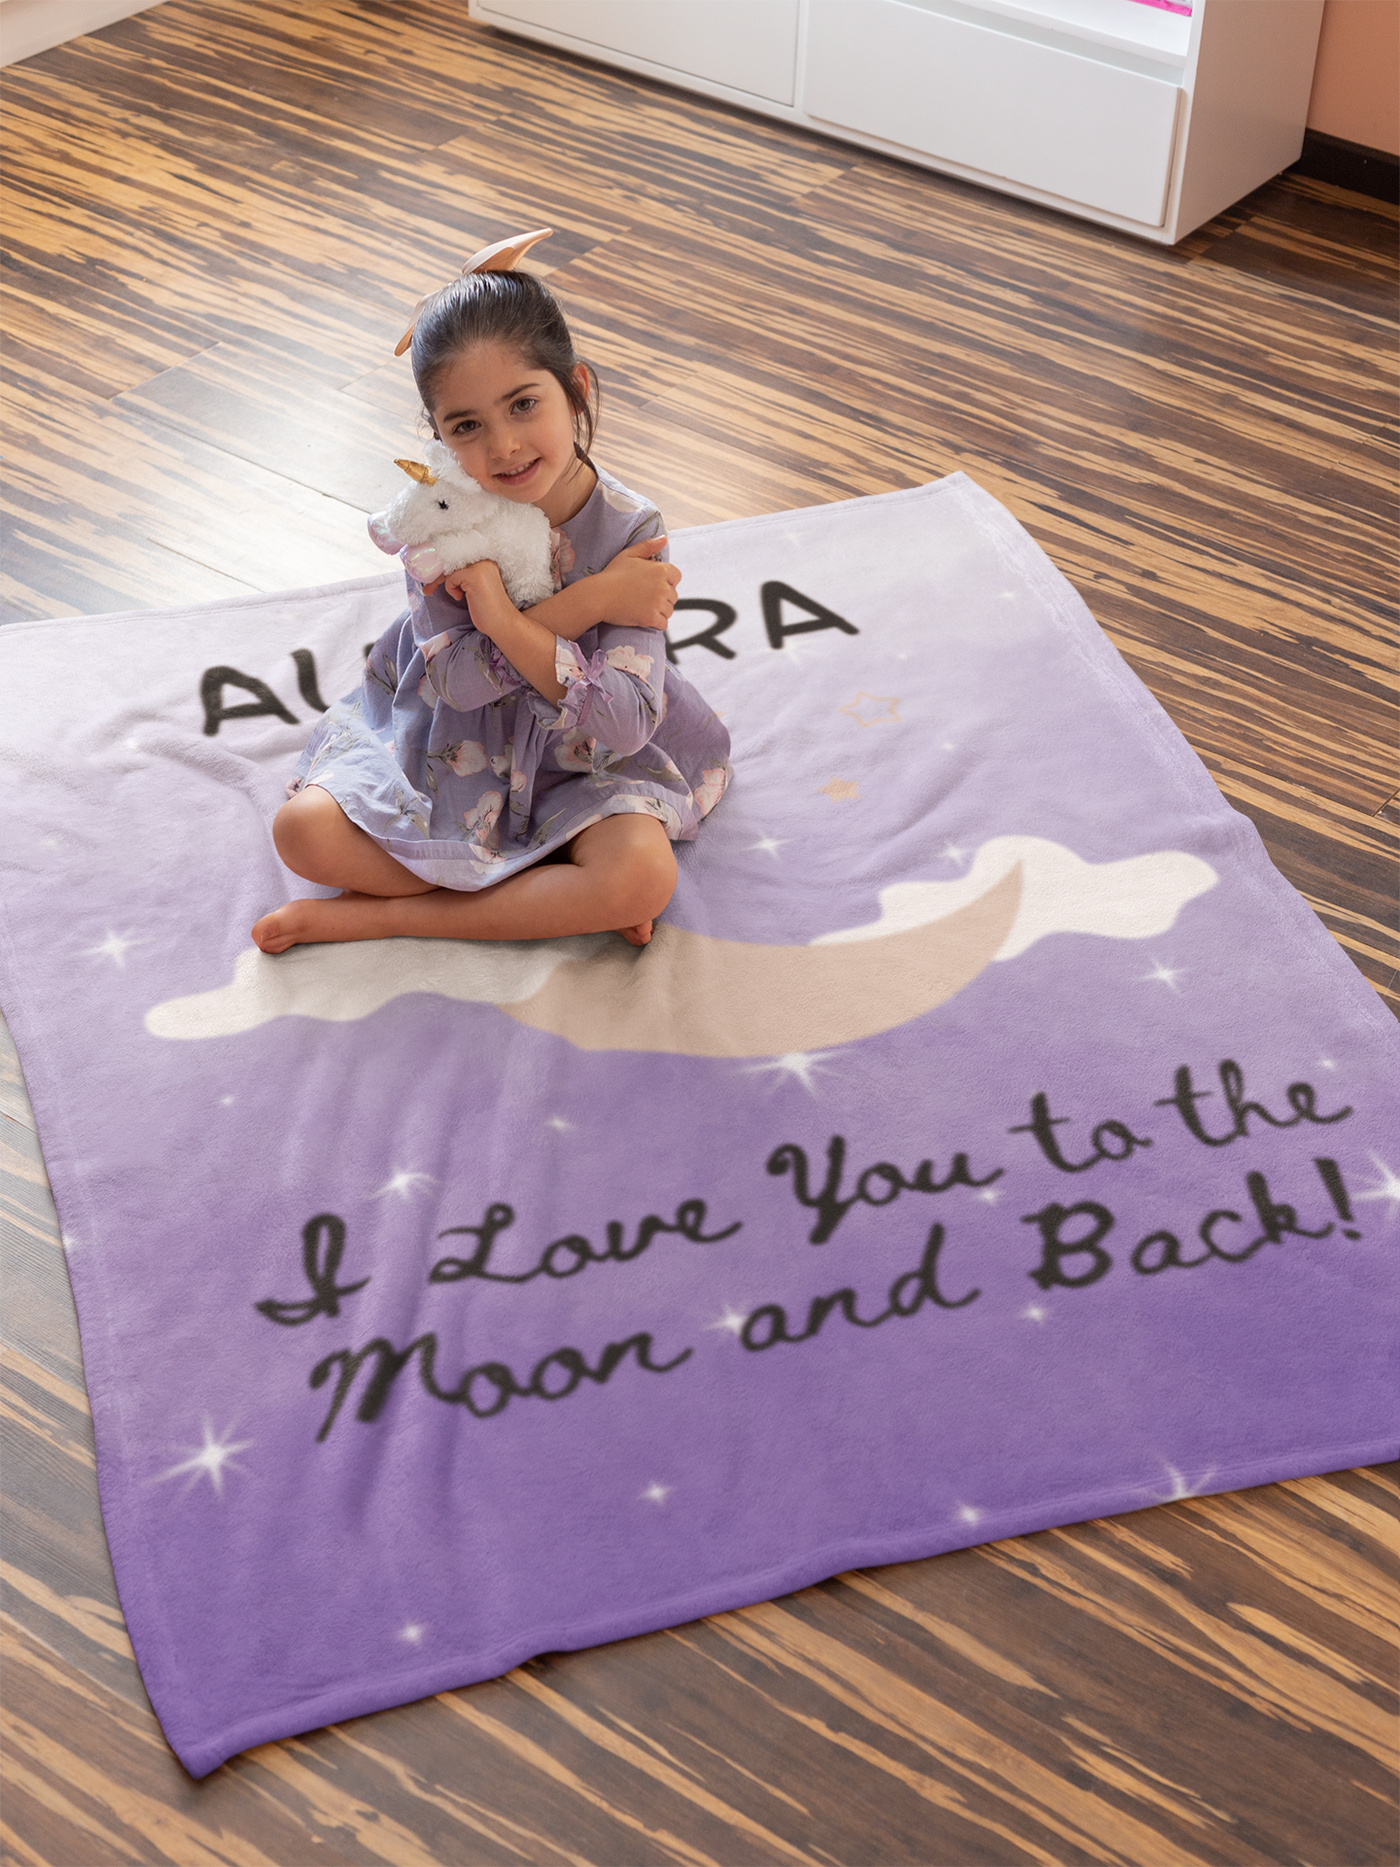 I Love You to the Moon and Back! Personalized Name Blanket